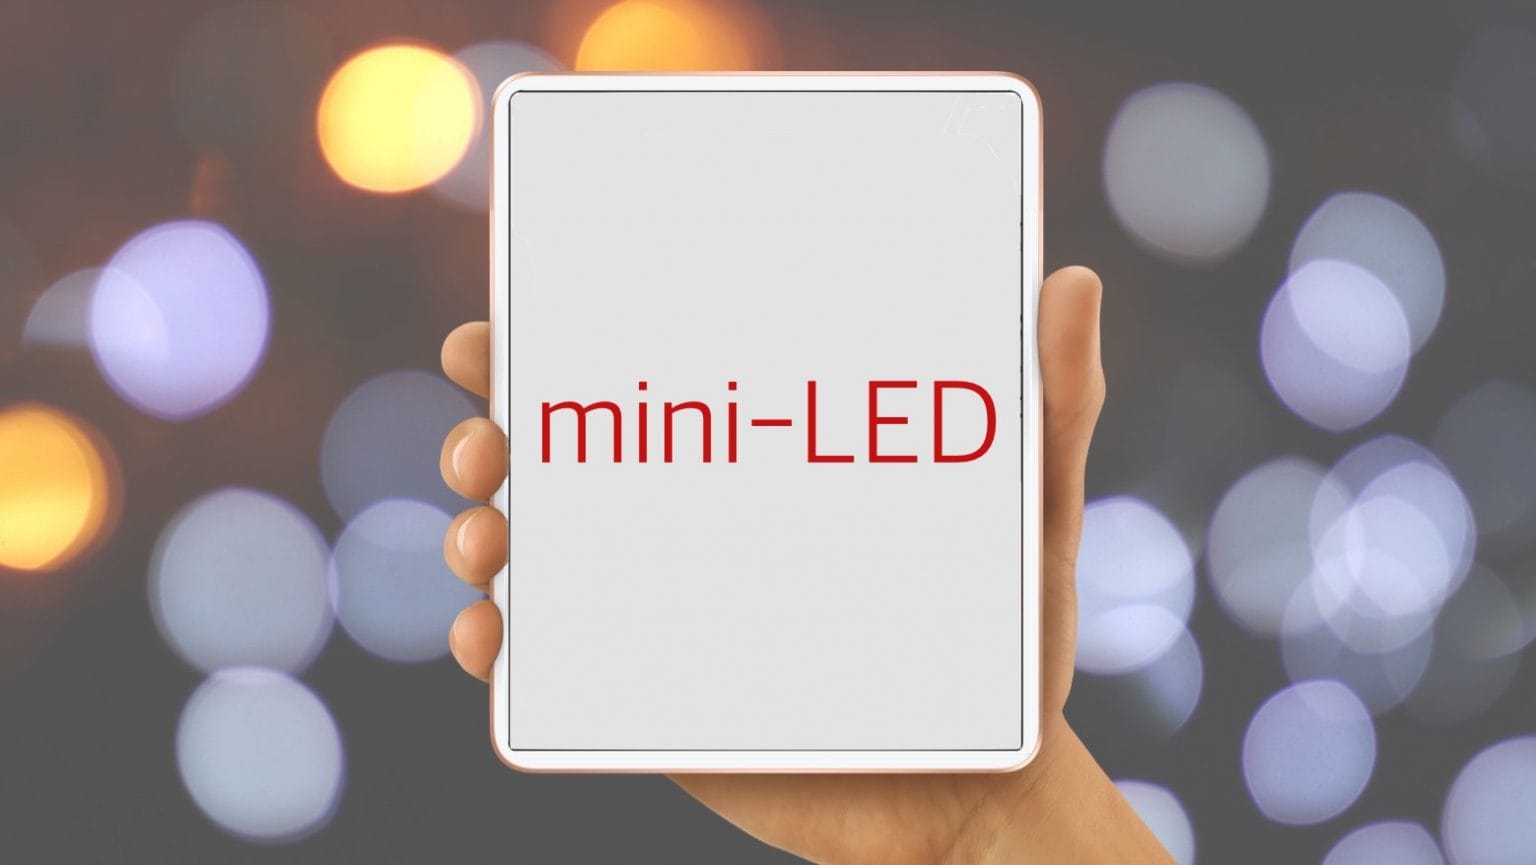 Gorgeous mini-LED display could add luster to next iPad mini